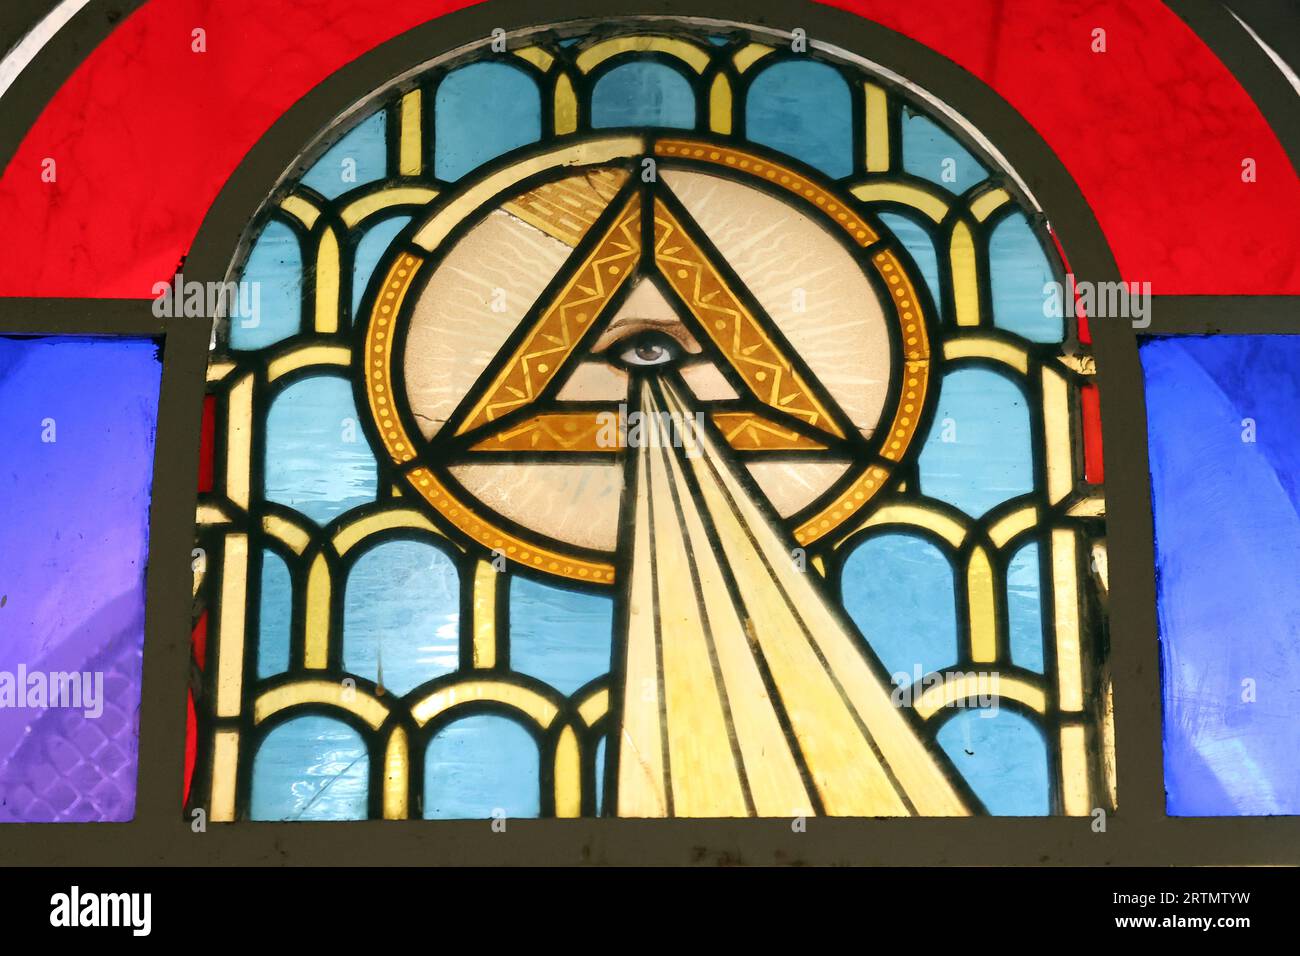 All-Seeing Eye of God, or the Eye of Providence. A triangle surrounded by rays of light or glory represents the divine providence. God is watching us. Stock Photo